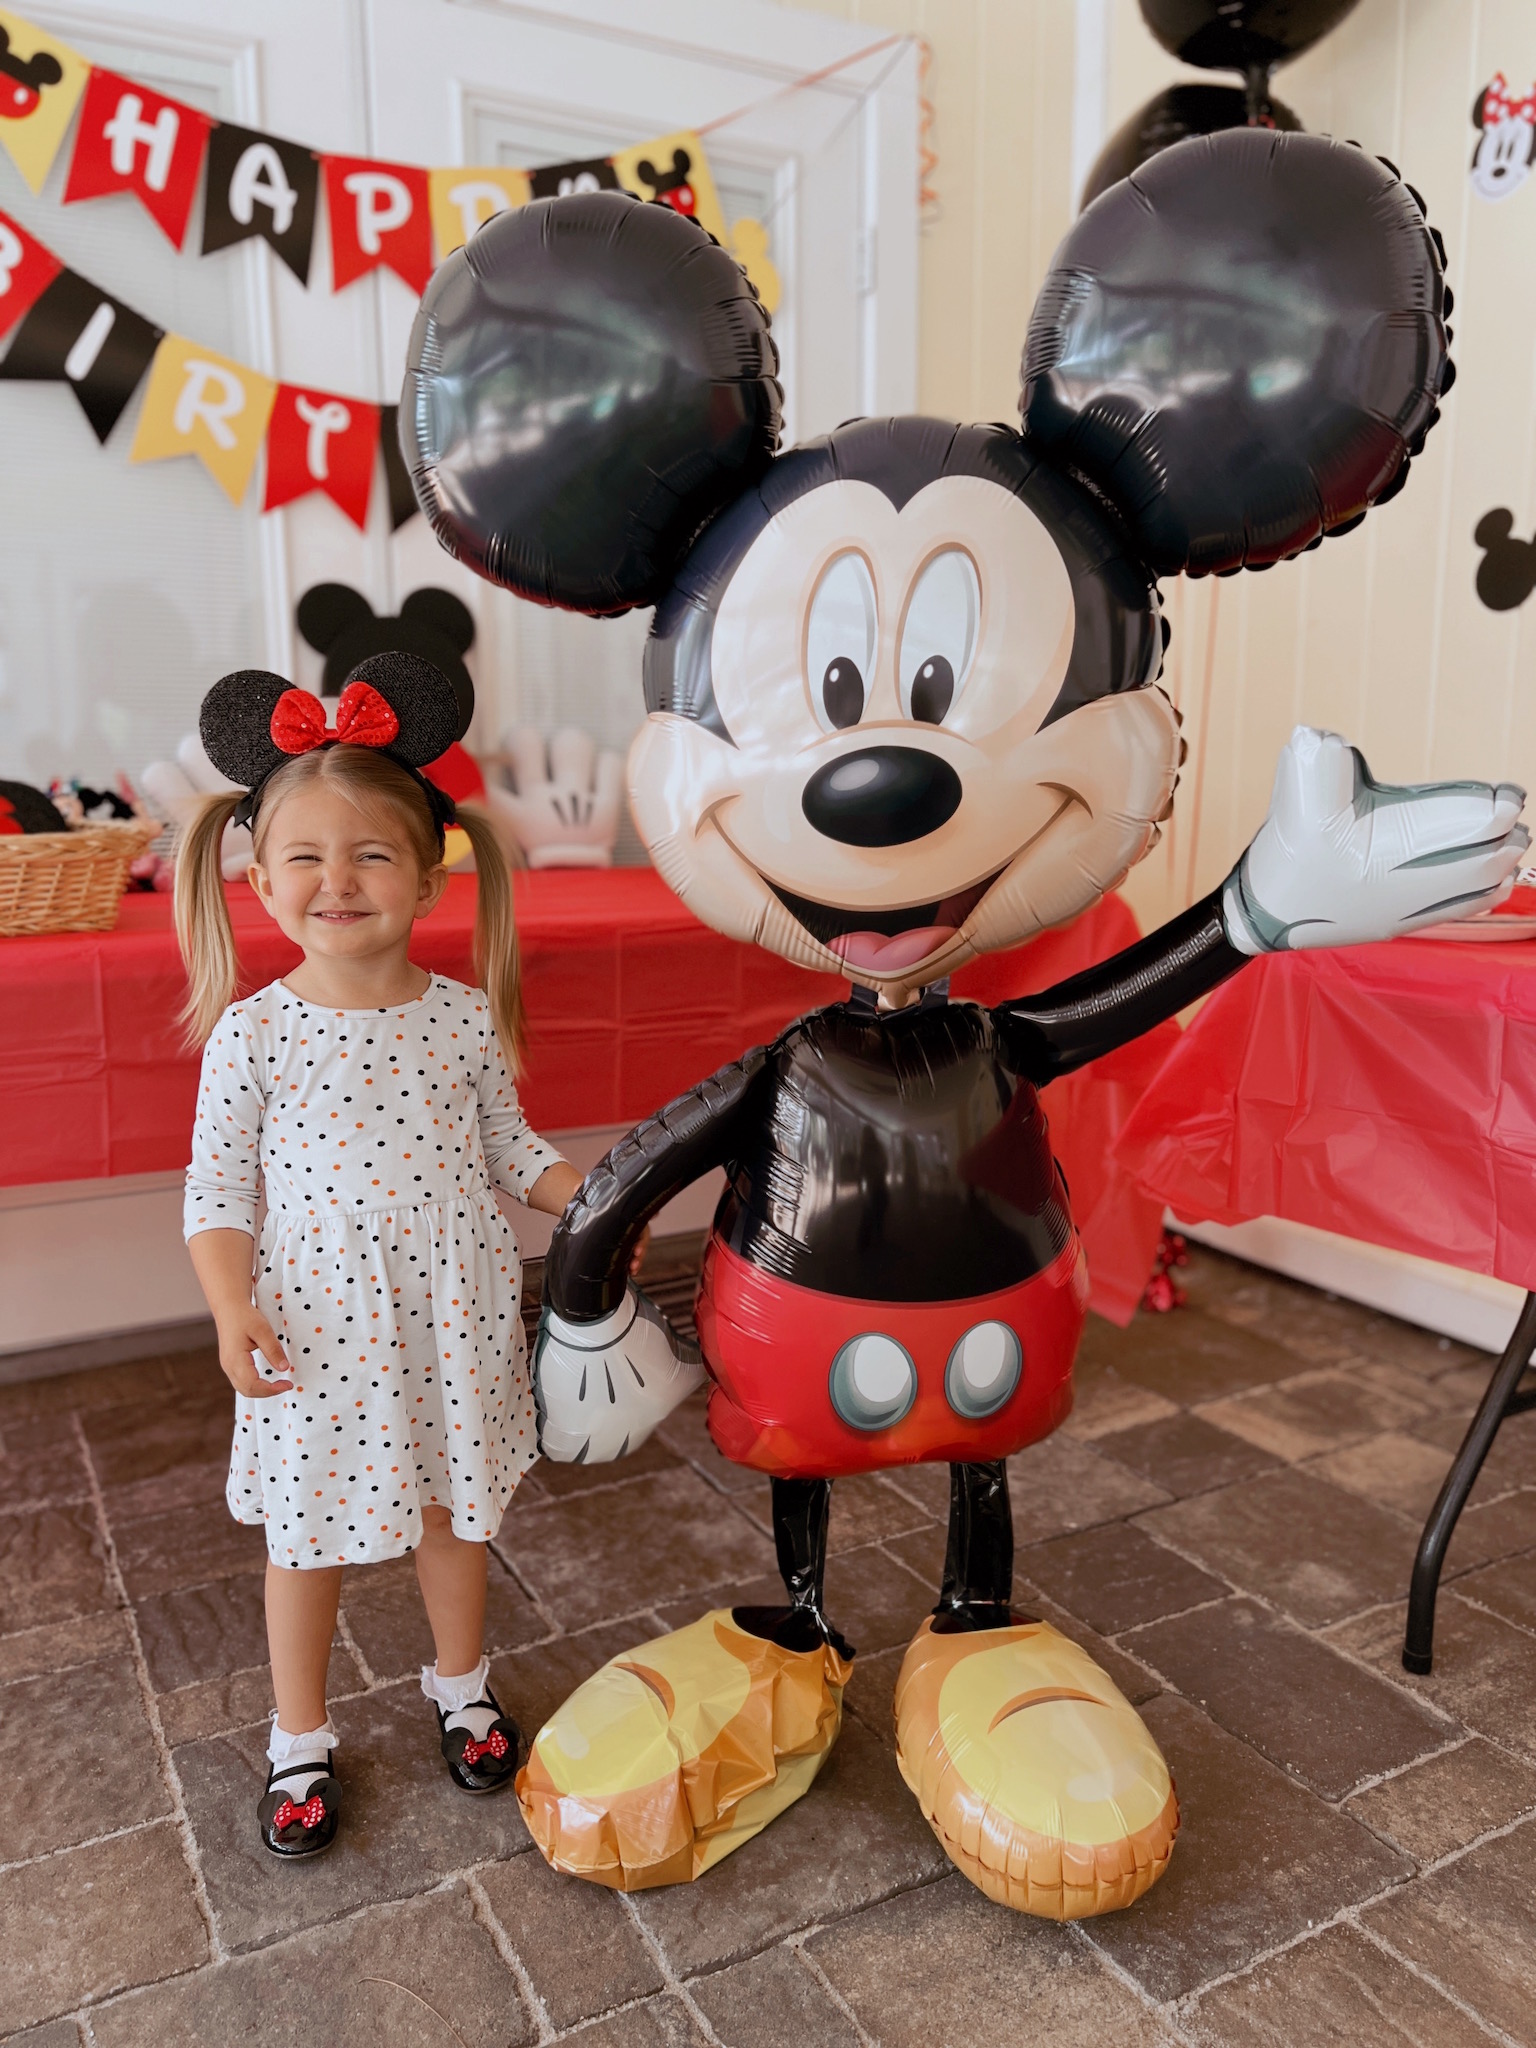 Magical "Mickey Minnie Mouse" Birthday Party Ideas - thinking